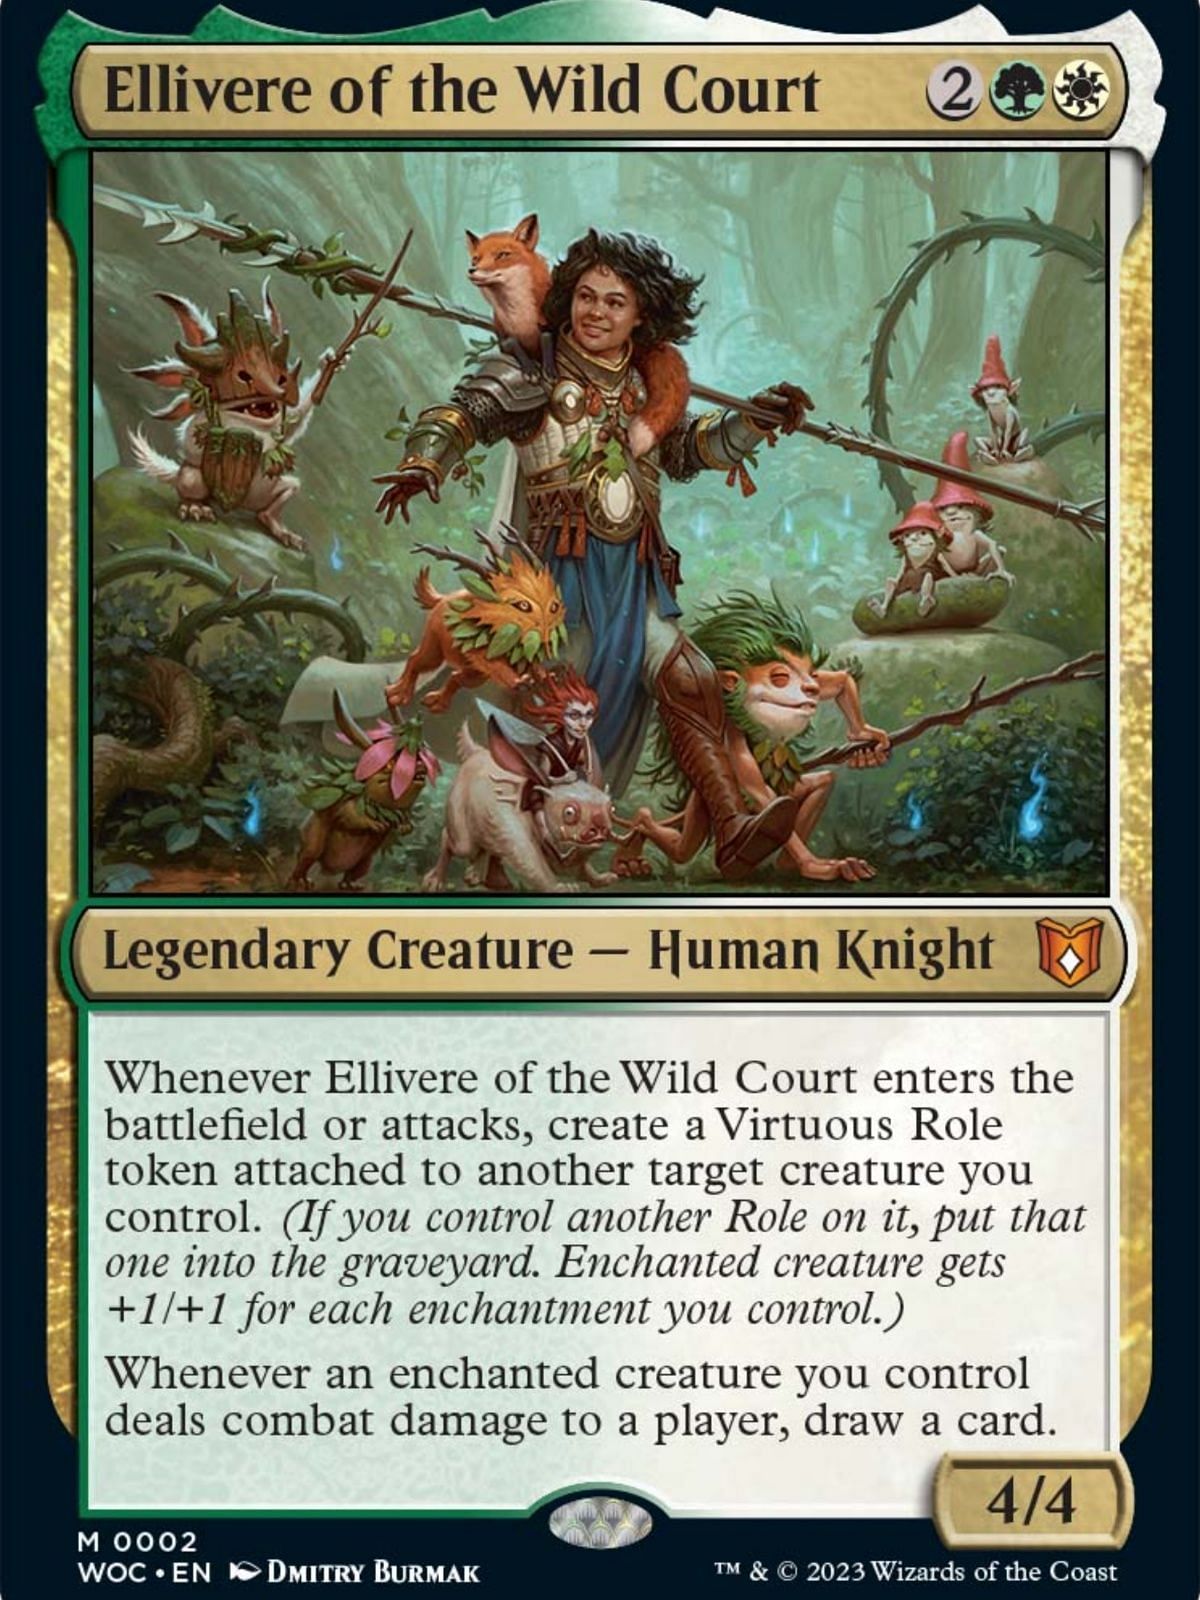 Ellivere of the Wild Court in MTG (Image via Wizards of the Coast)